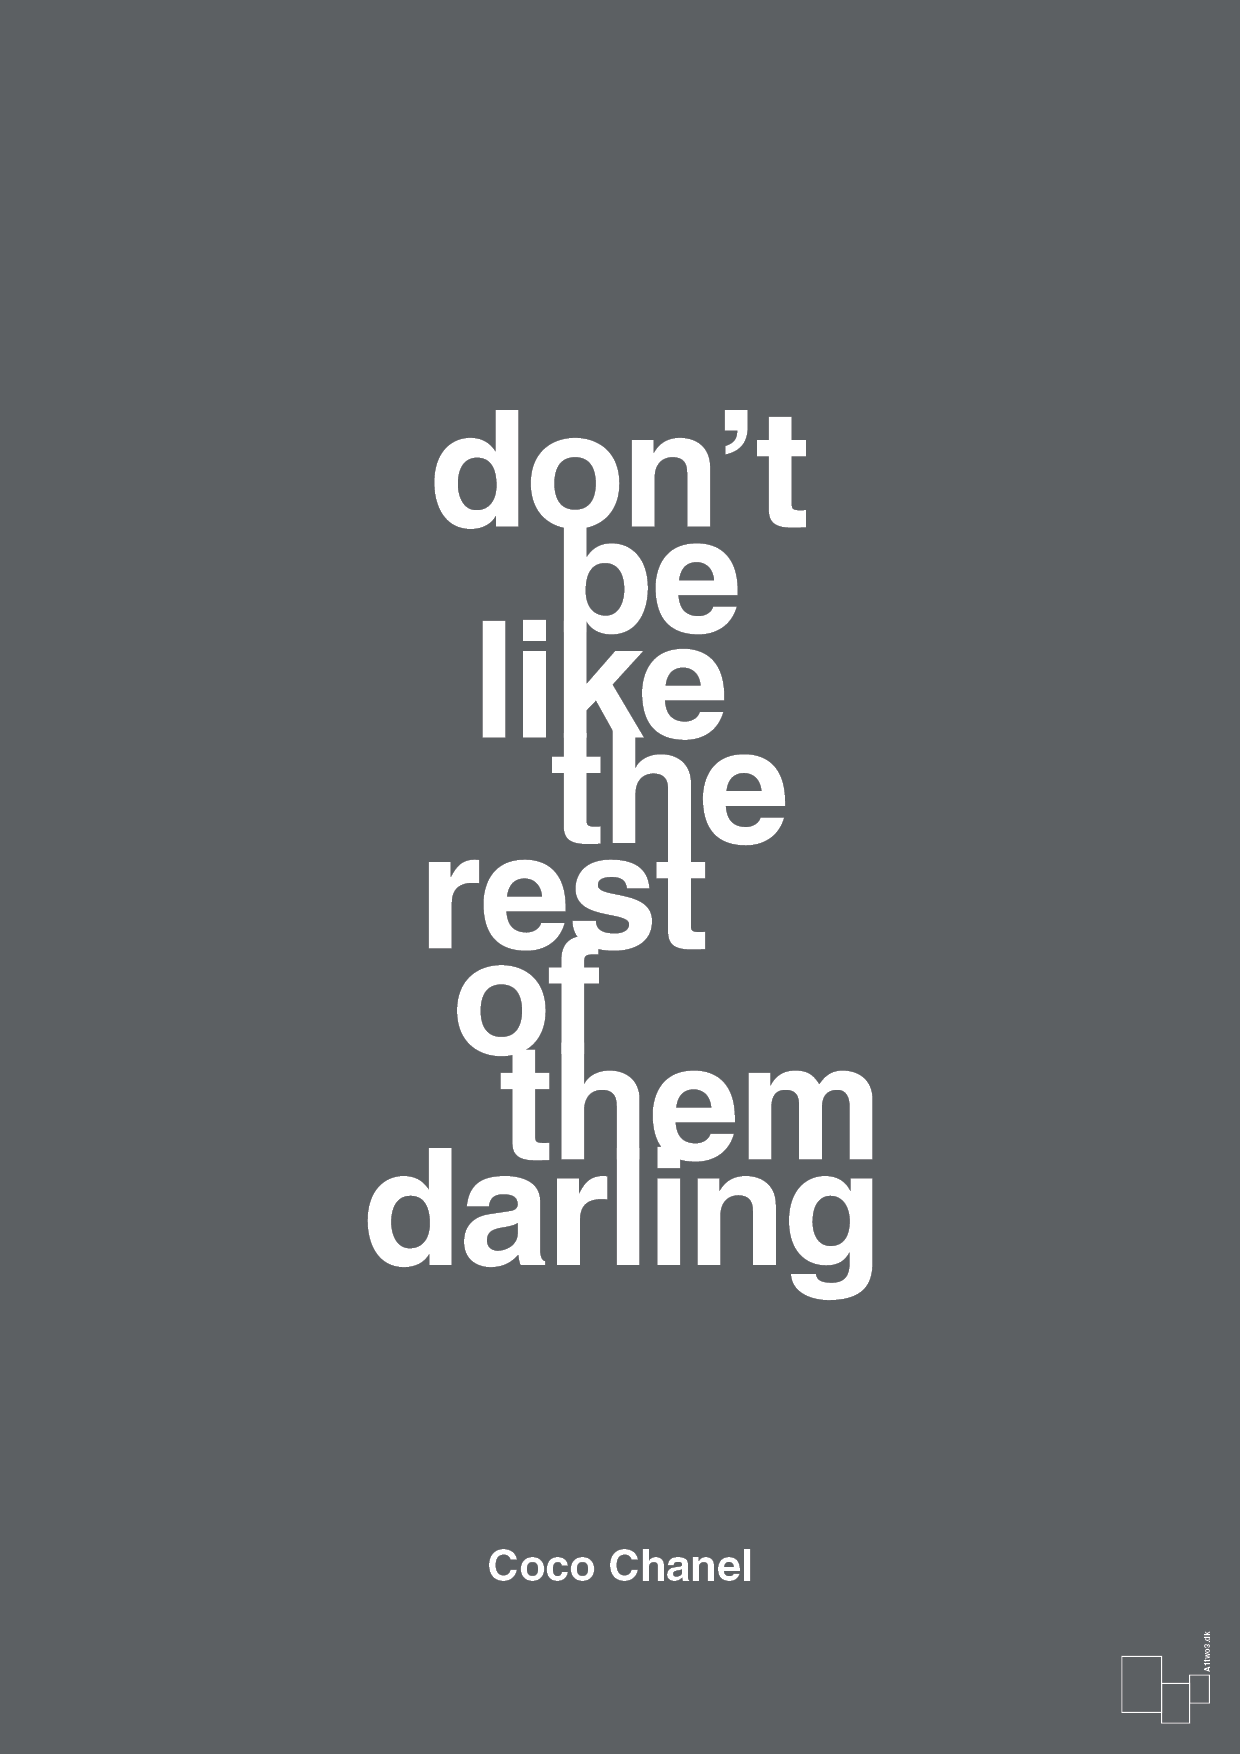 don’t be like the rest of them darling - Plakat med Citater i Graphic Charcoal